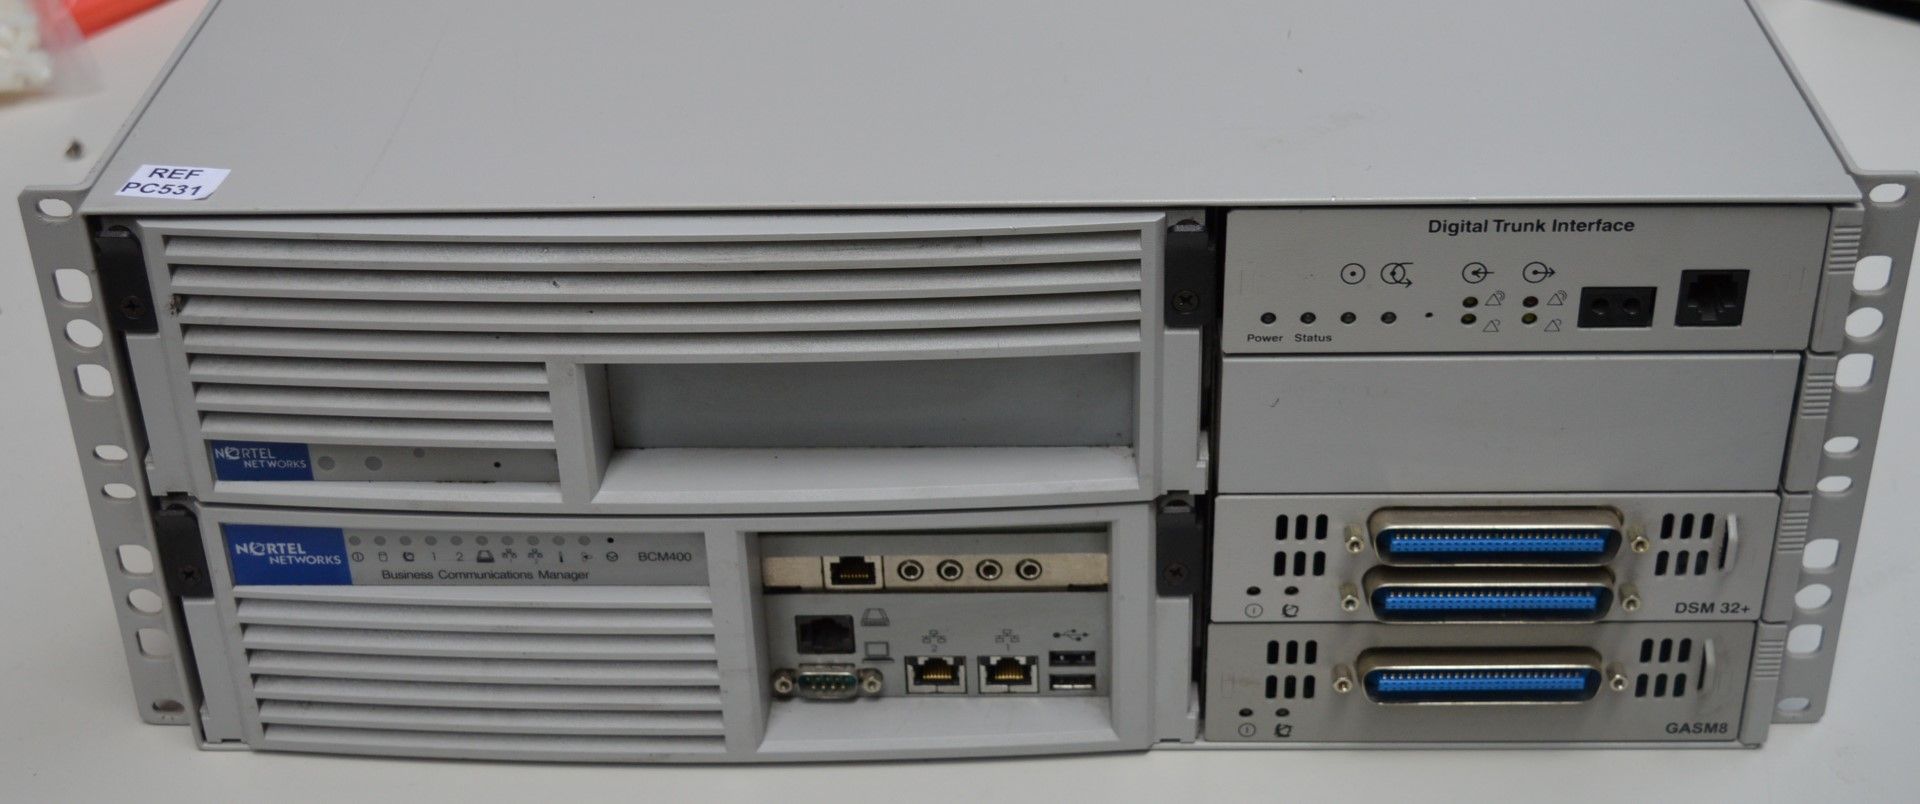 1 x Nortel Business Communication Manager BCM 400 with Digital Truck Interface, GASM8 Card ad DSM - Image 3 of 8